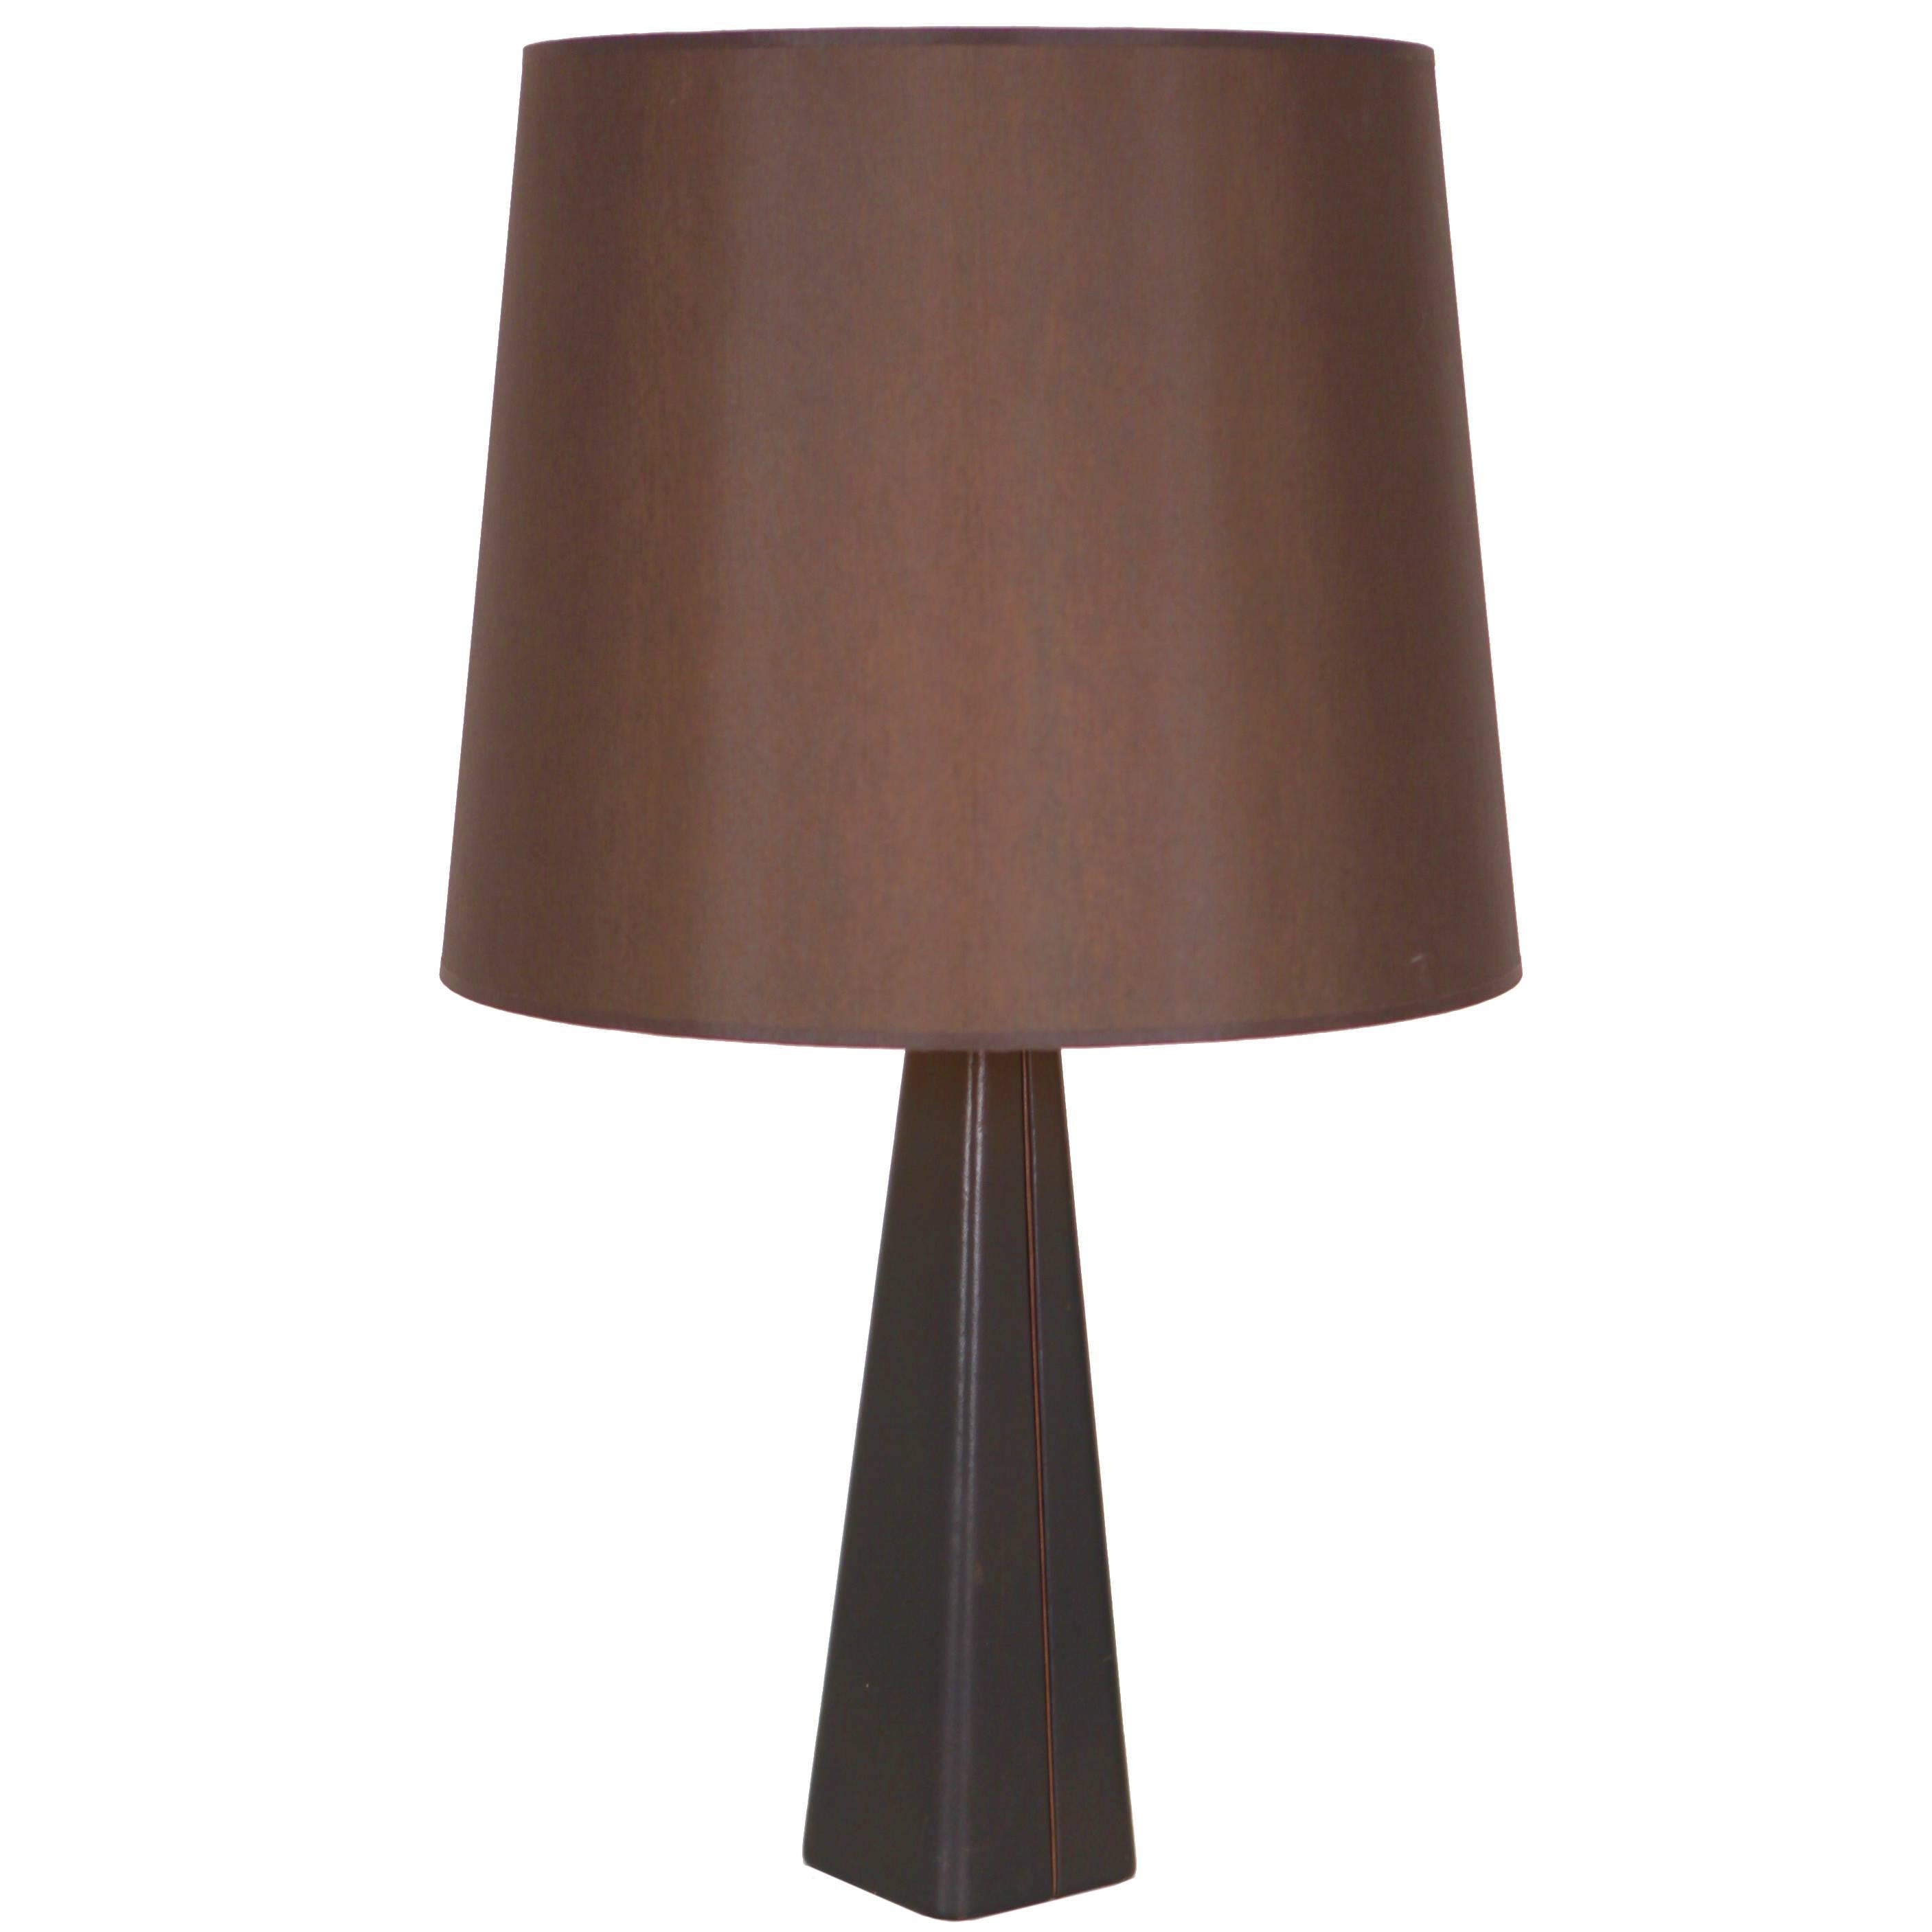 Lisa Johansson-Pape, Leather Covered Table Lamp